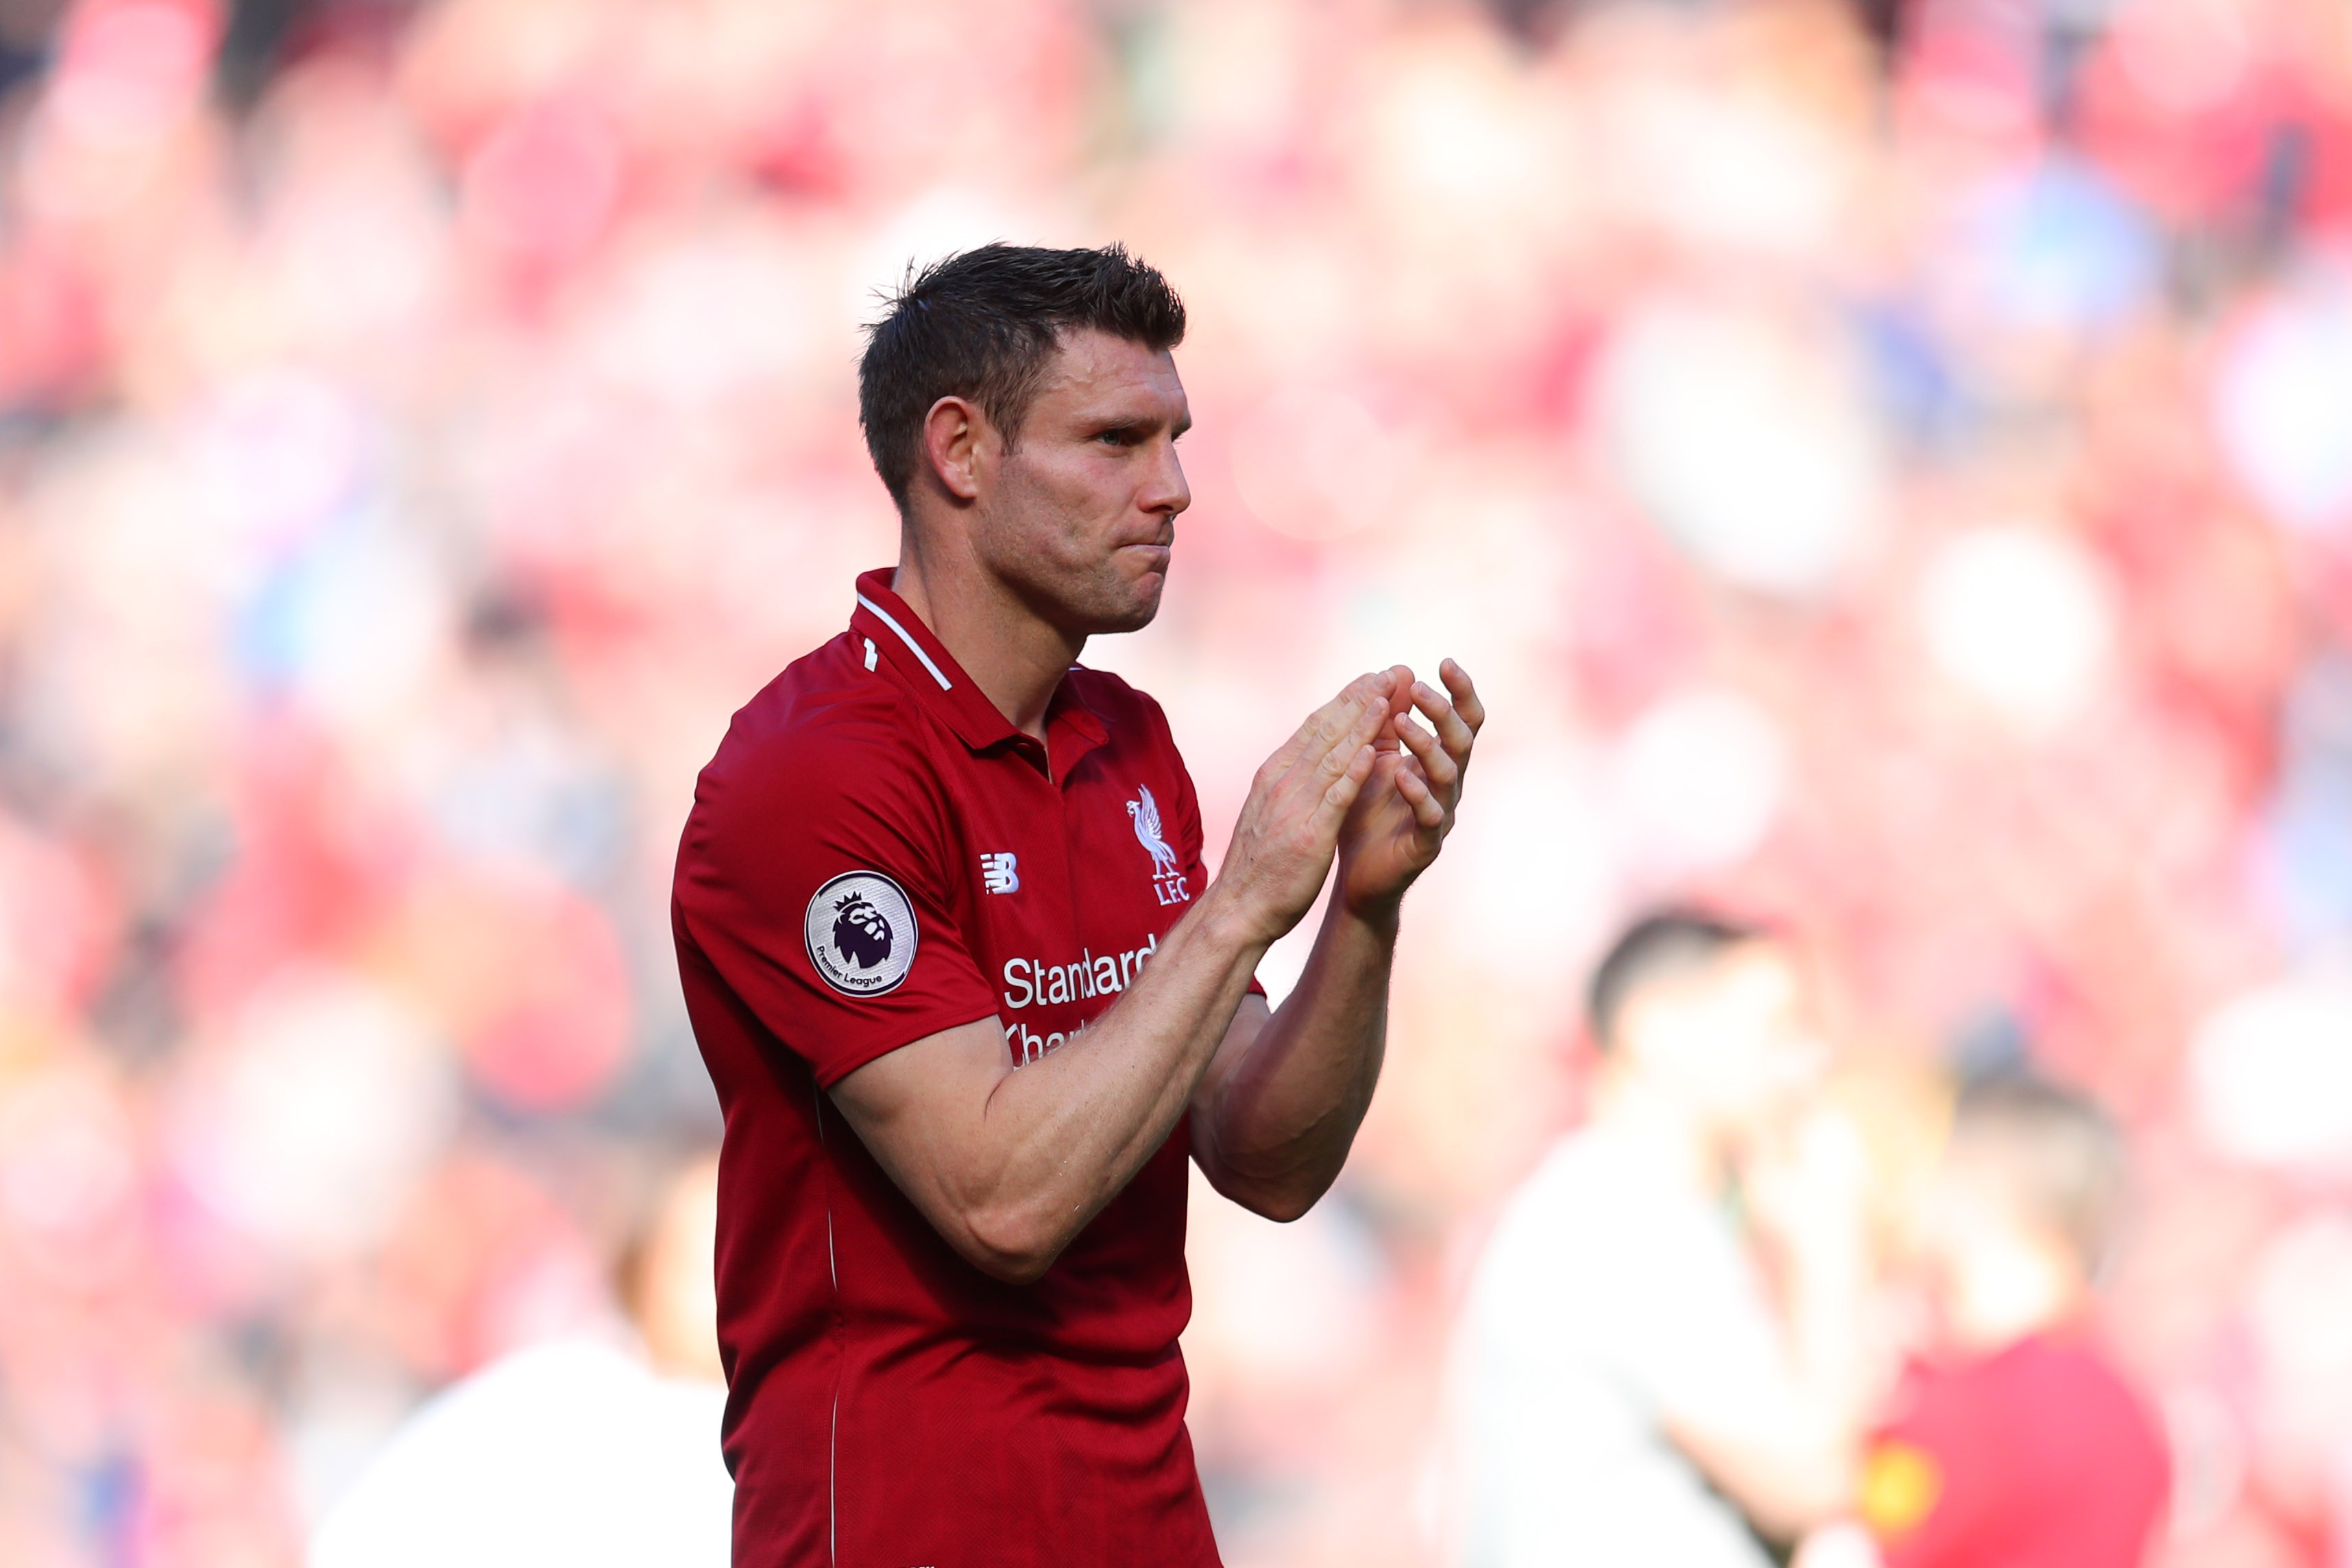 Liverpool can replace James Milner the player, not his legacy as a role model